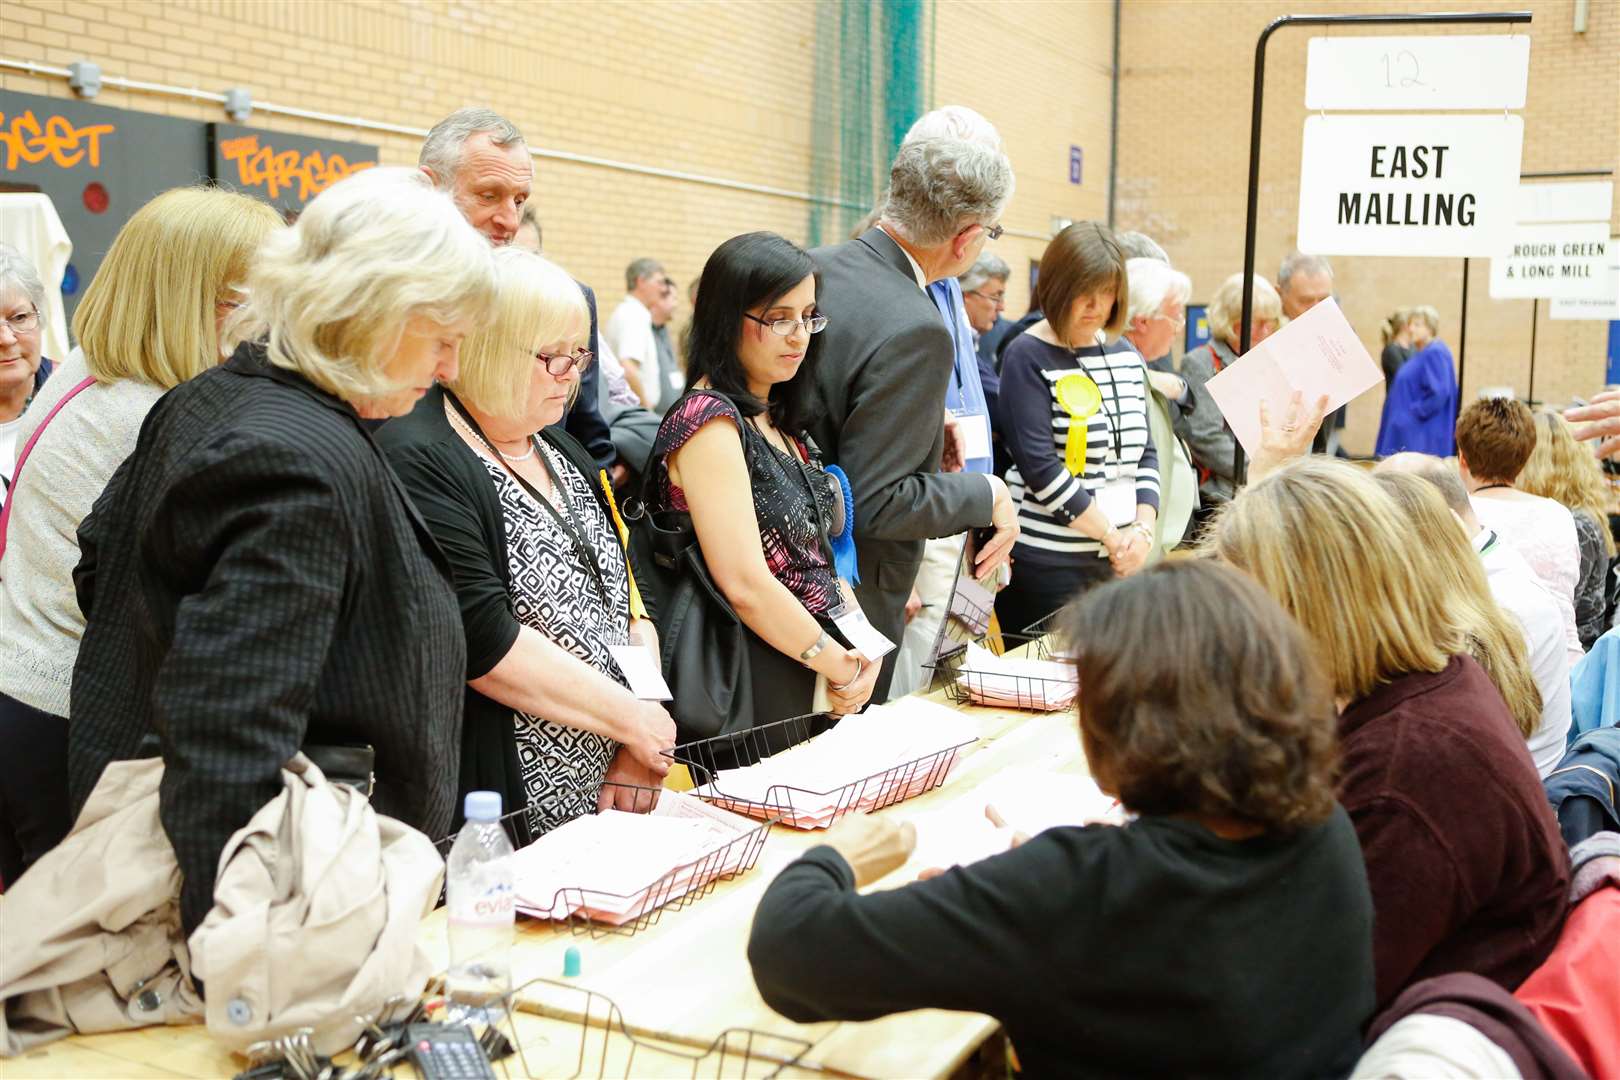 Votes are counted at The Angel Leisure Centre, Tonbridge